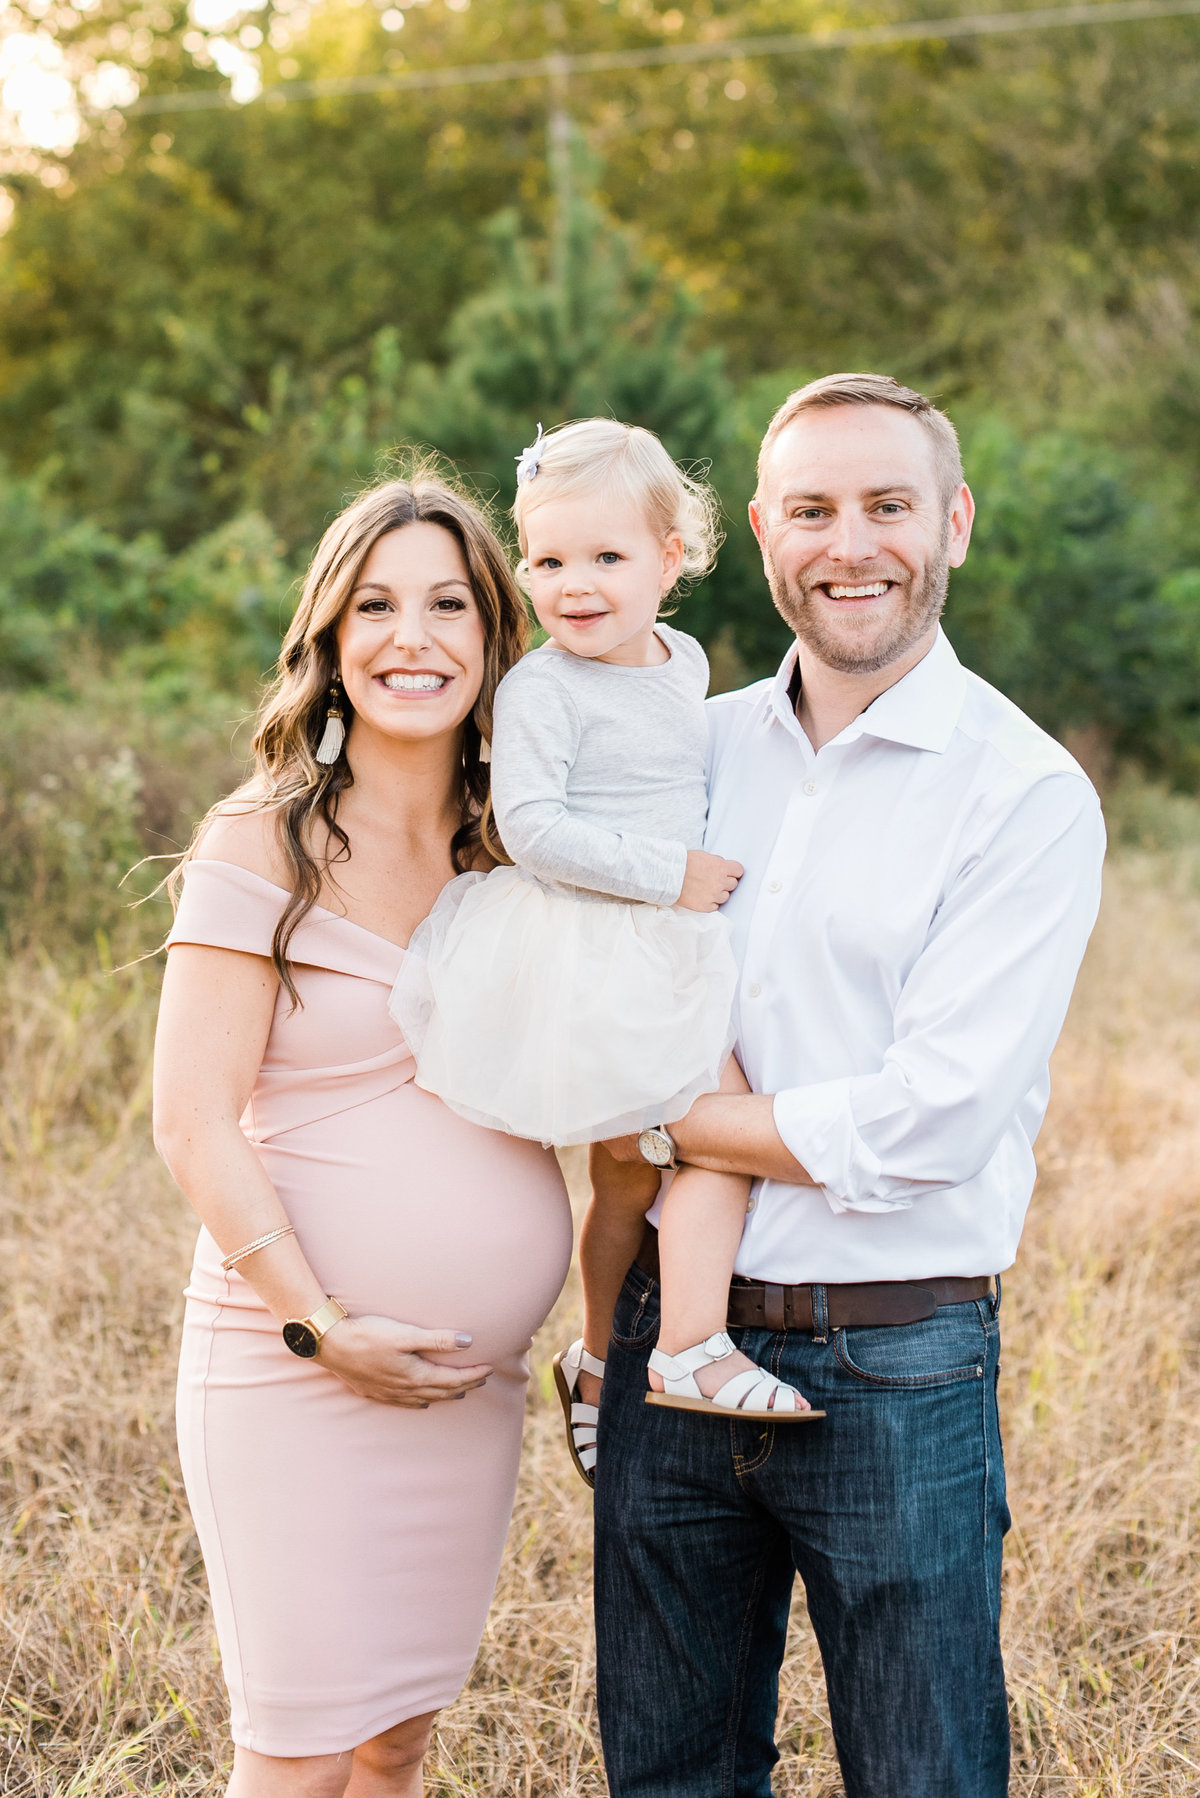 Family smiles at the camera during a maternity photo session in Raleigh NC. Photographed by Raleigh Maternity Photographer A.J. Dunlap Photography.